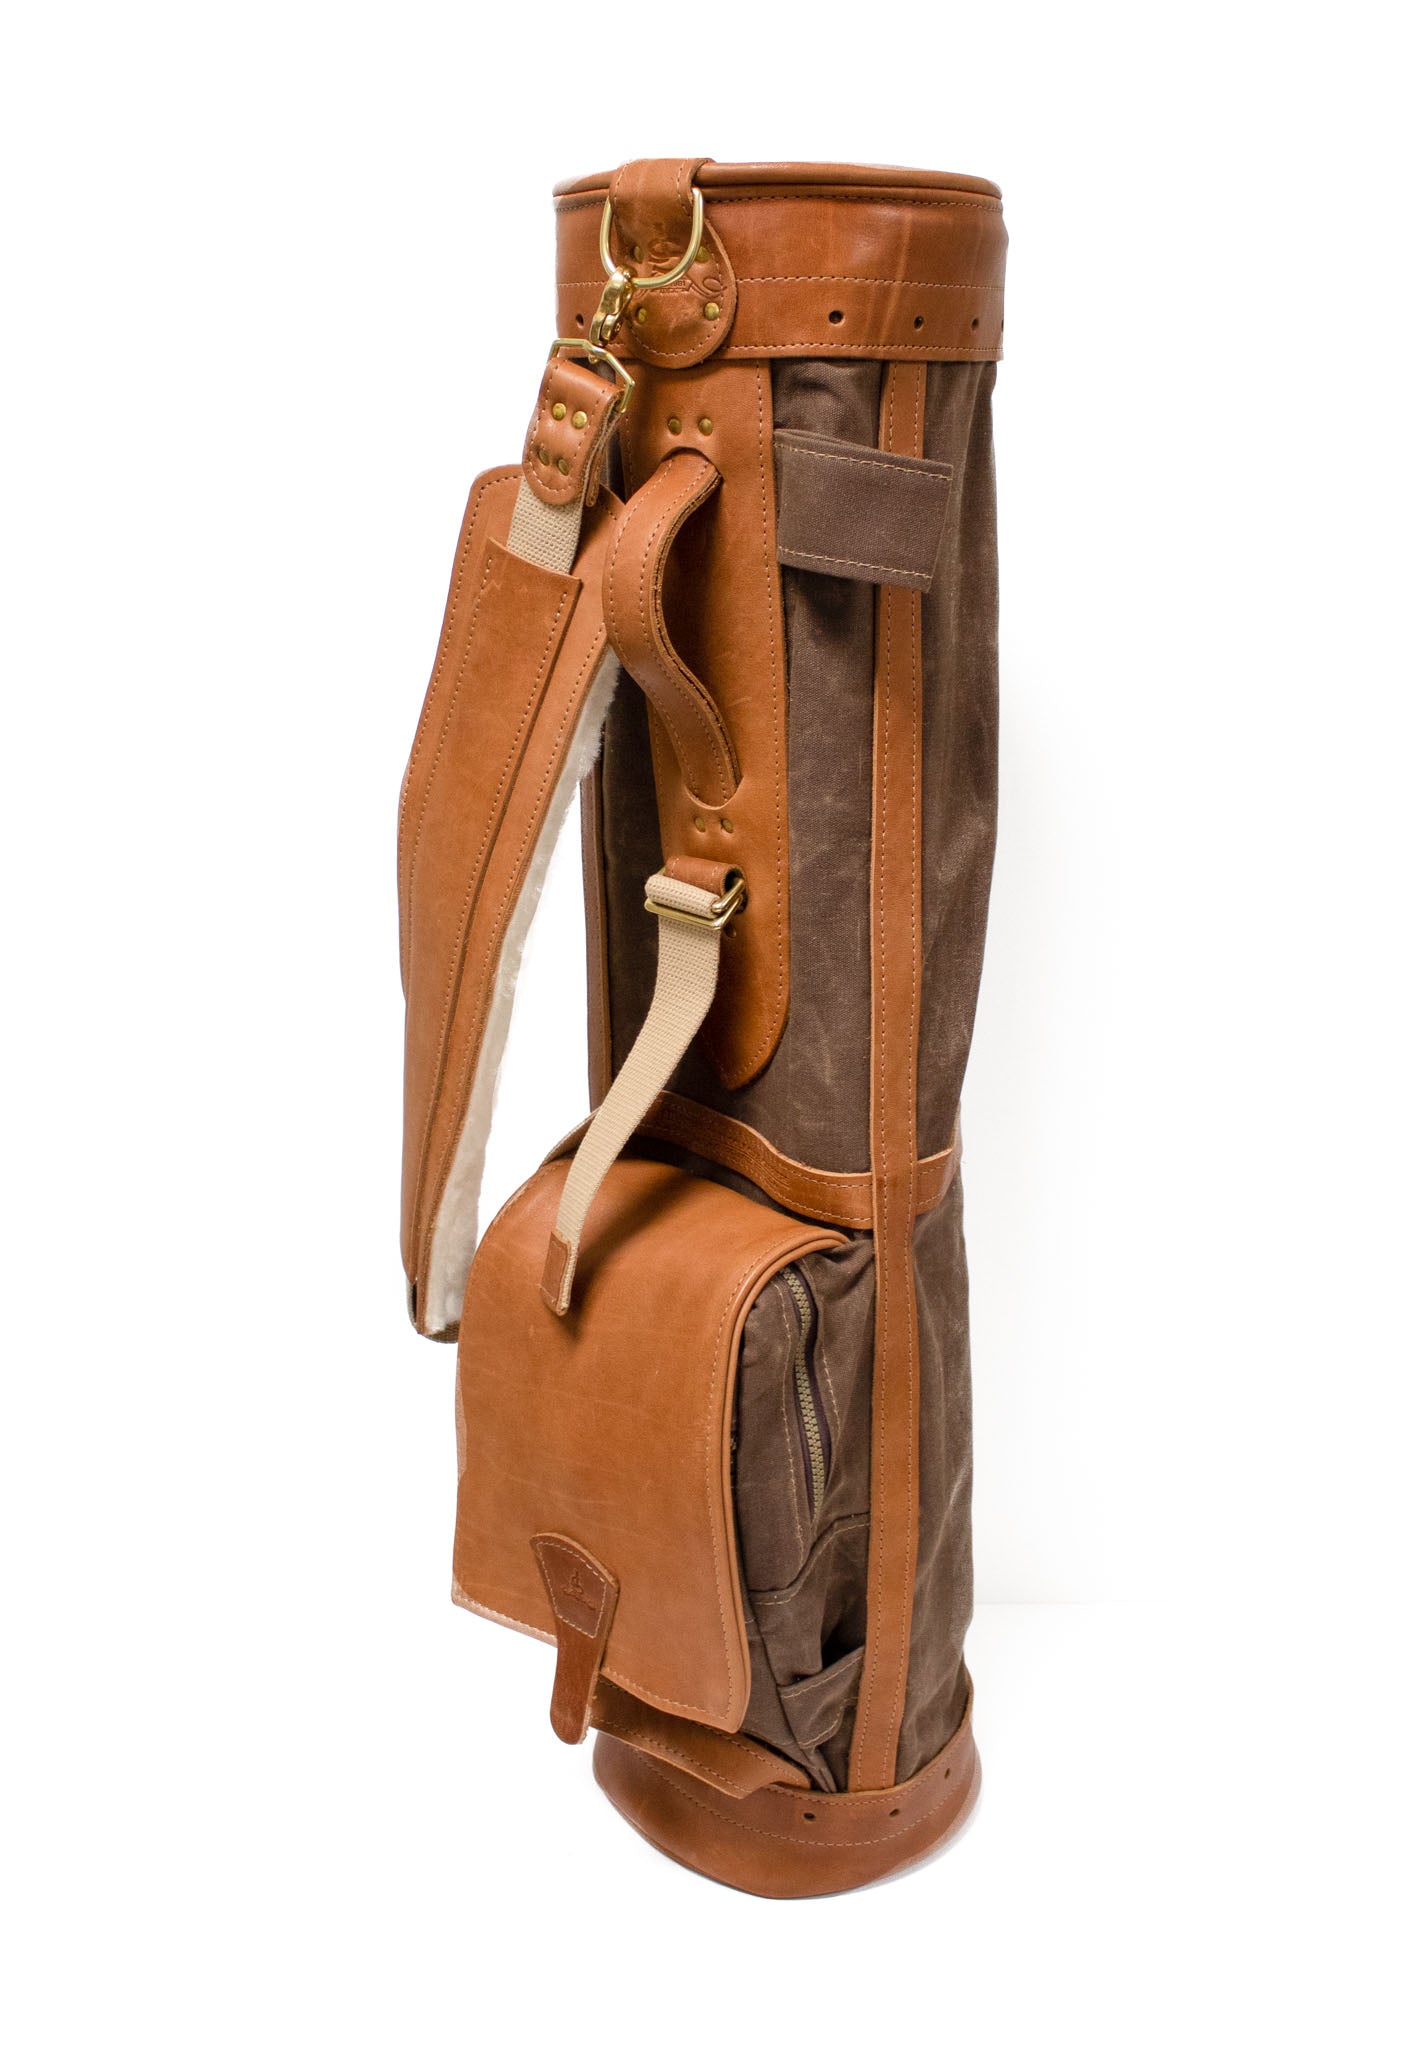 Bourbon Sunday Style Golf Bag with Natural Leather Ball Pocket Flap- Steurer & Jacoby 